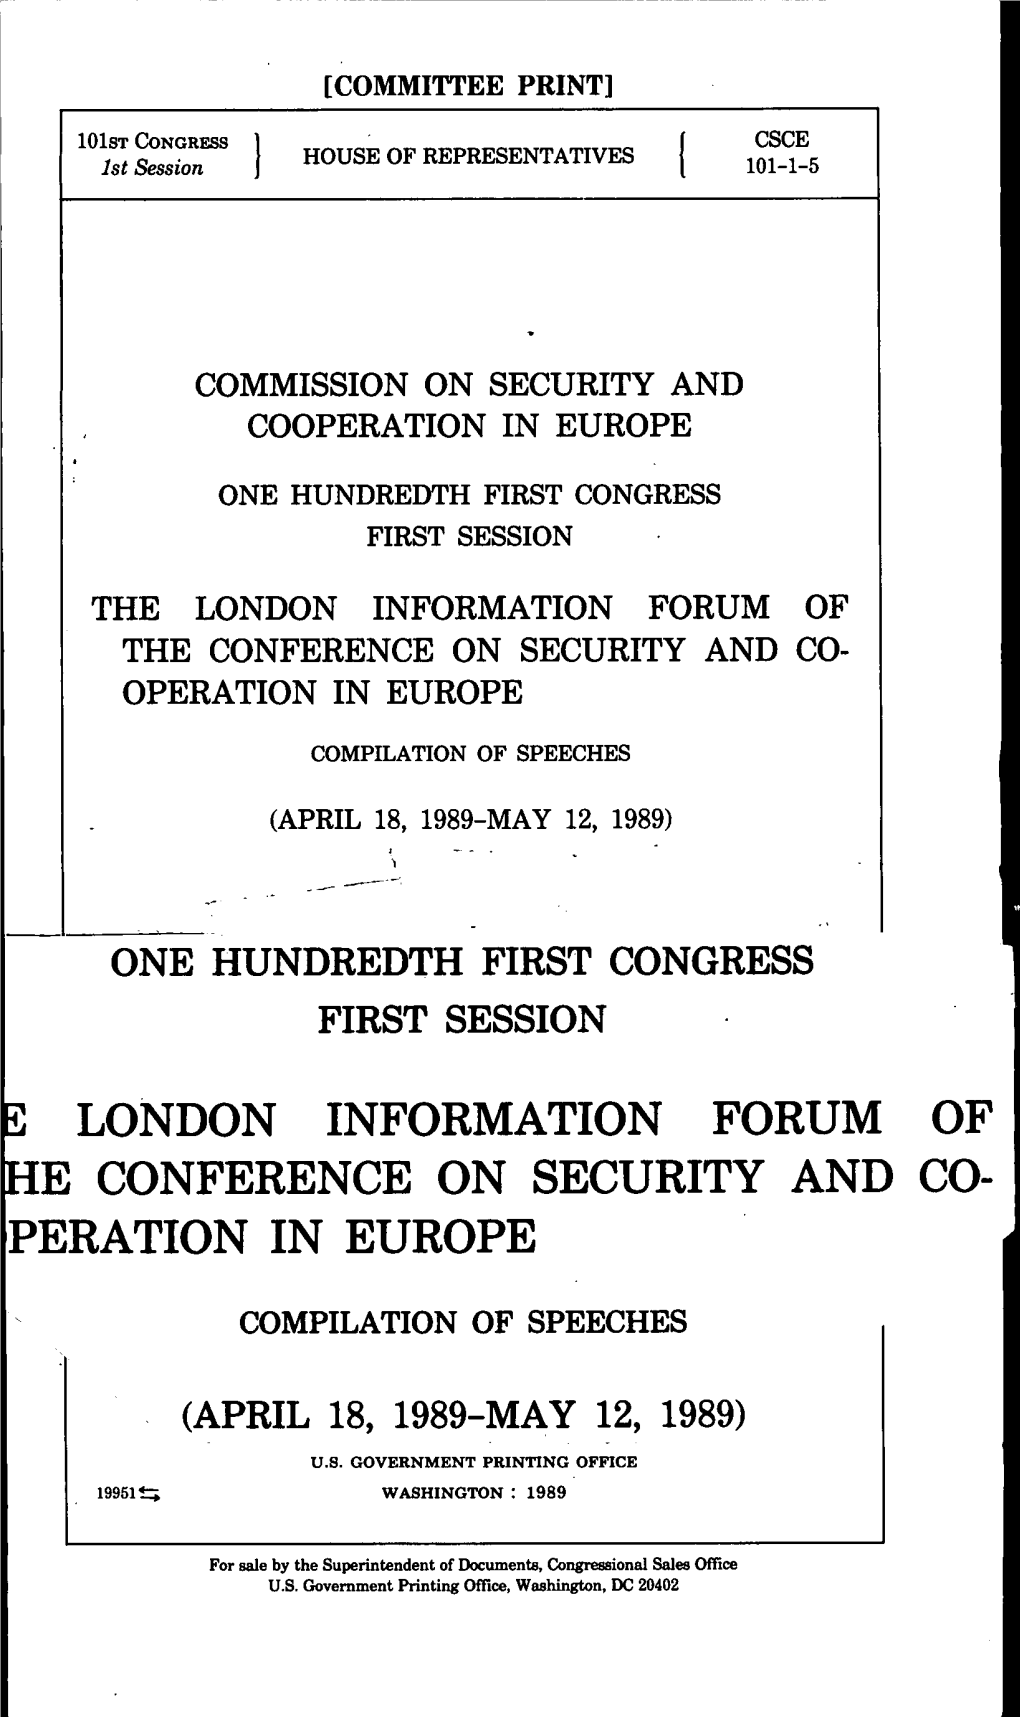 The London Information Forum of the CSCE 1989